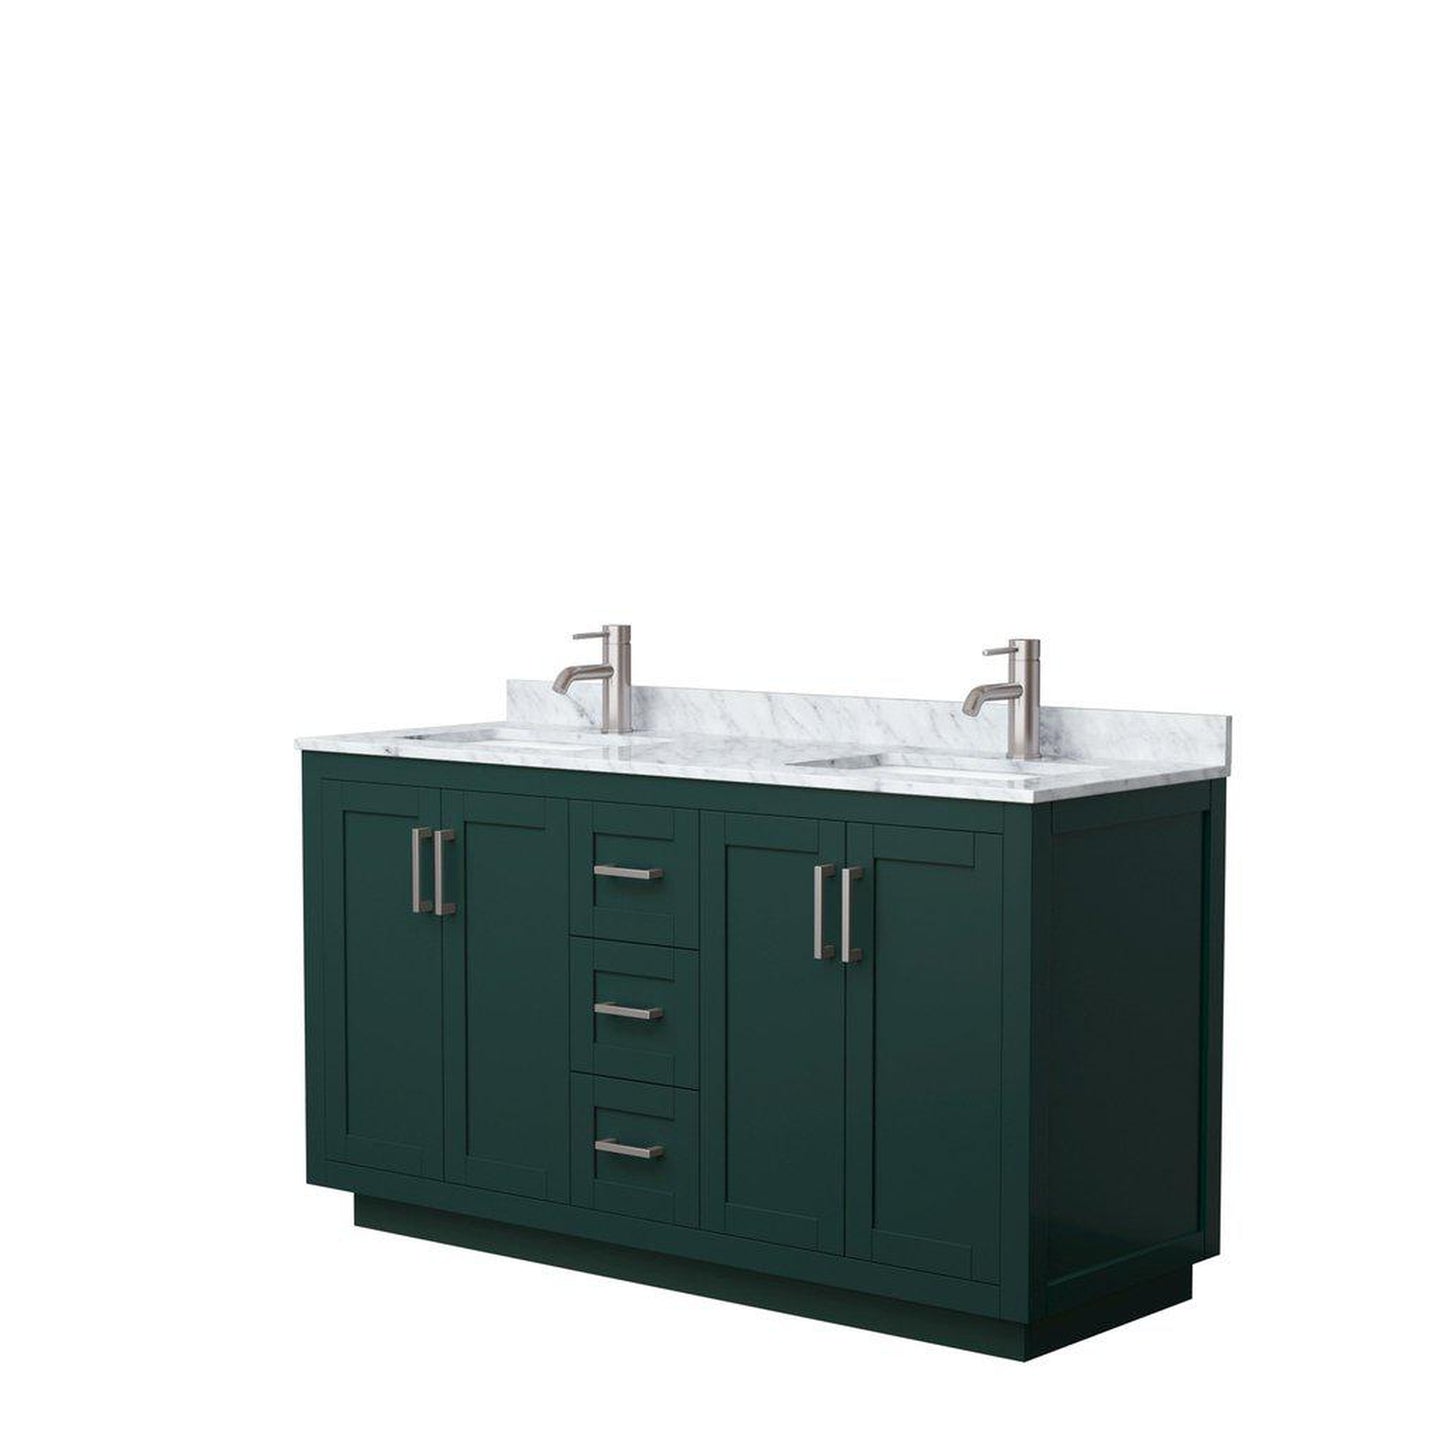 Wyndham Collection Miranda 60" Double Bathroom Green Vanity Set With White Carrara Marble Countertop, Undermount Square Sink, And Brushed Nickel Trim